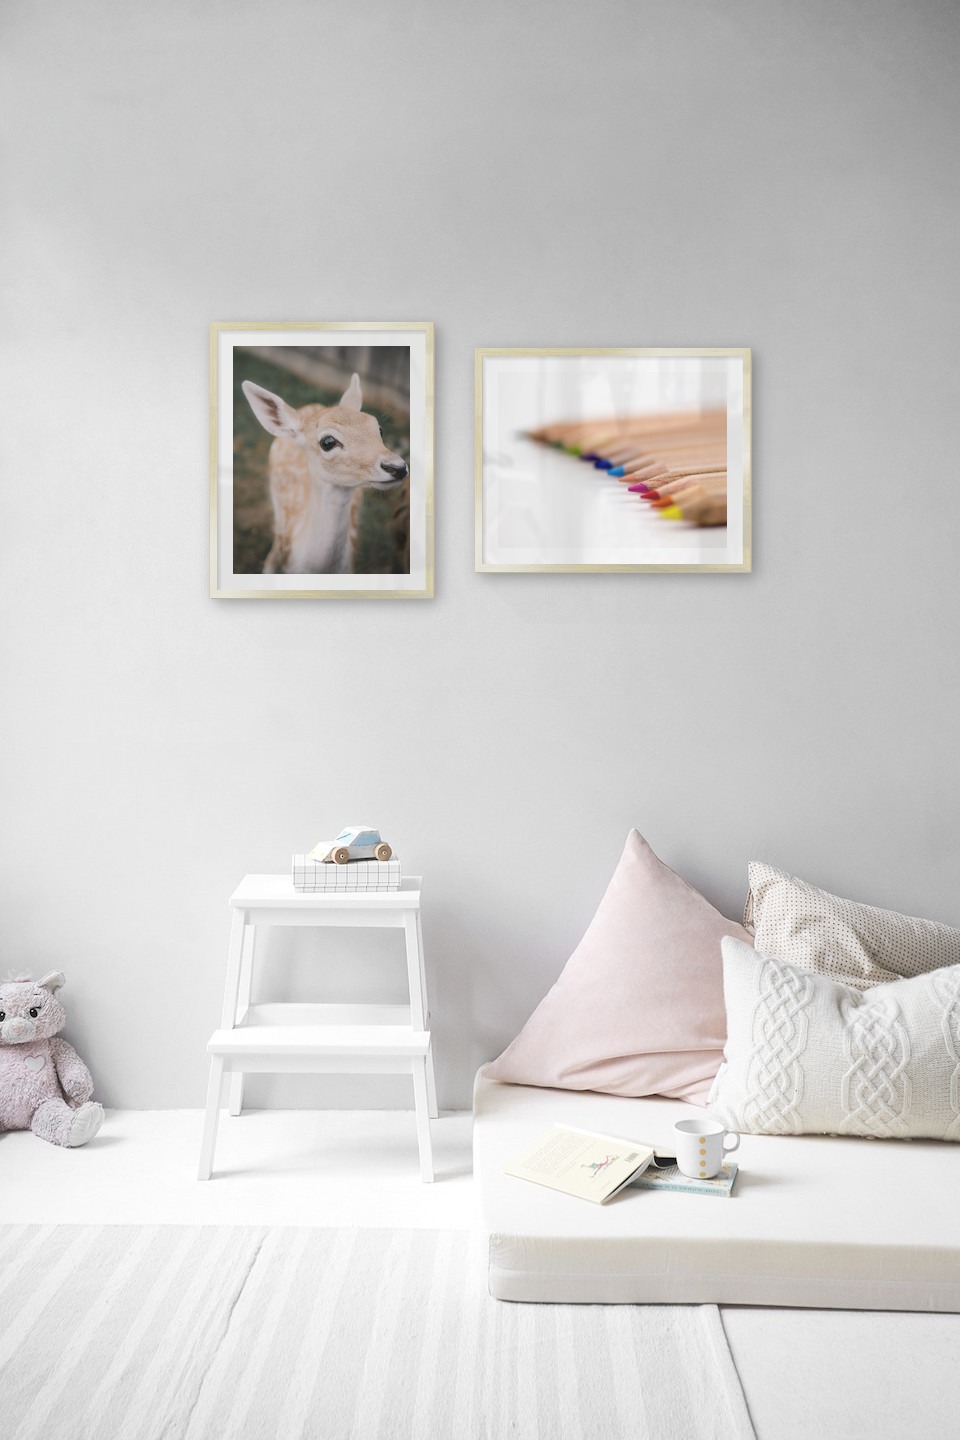 Gallery wall with picture frames in gold in sizes 40x50 with prints "Deer" and "Pencils in different colors"